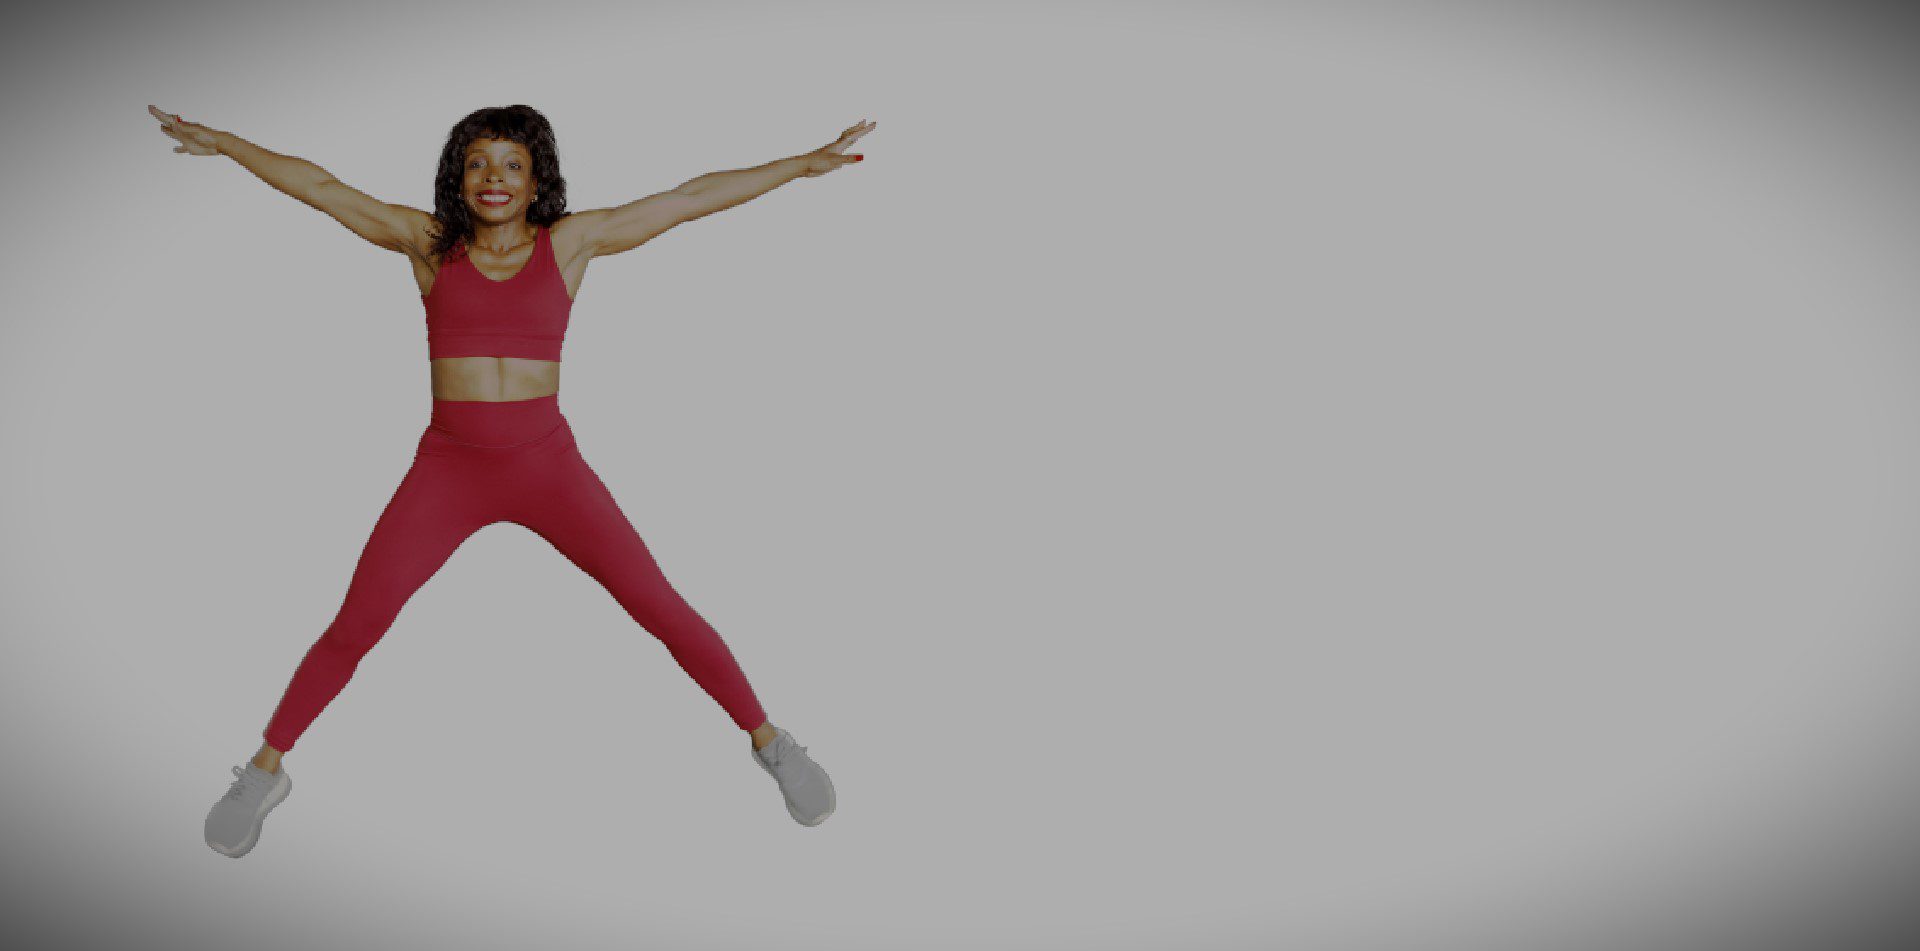 A woman in red is jumping up and doing a trick